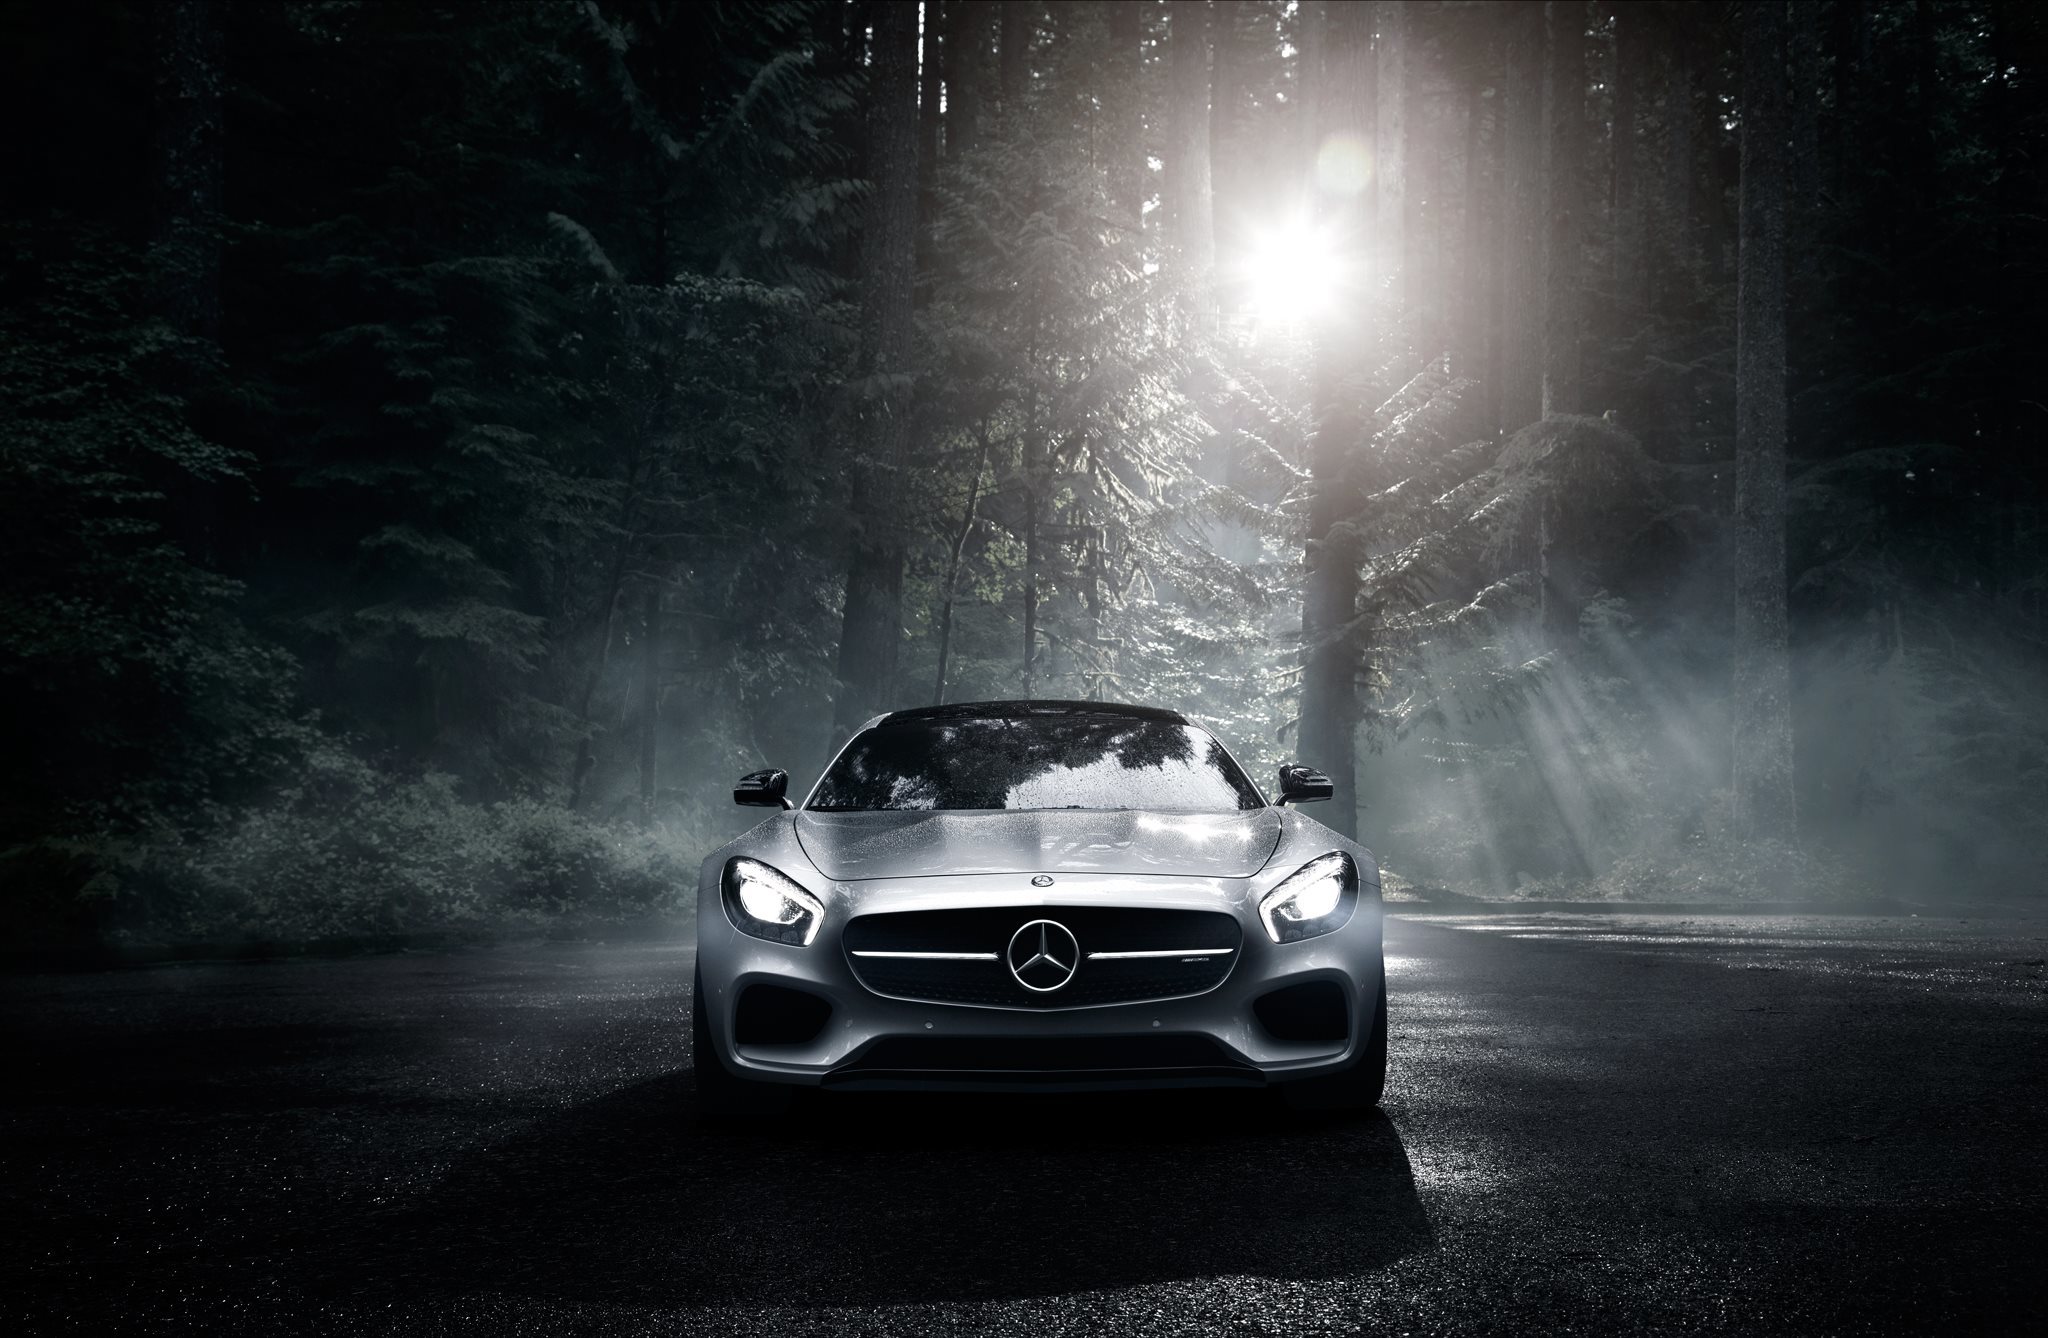 mercedes benz, cars, silvery, night, forest, front view, amg, silver, 2016, gt s